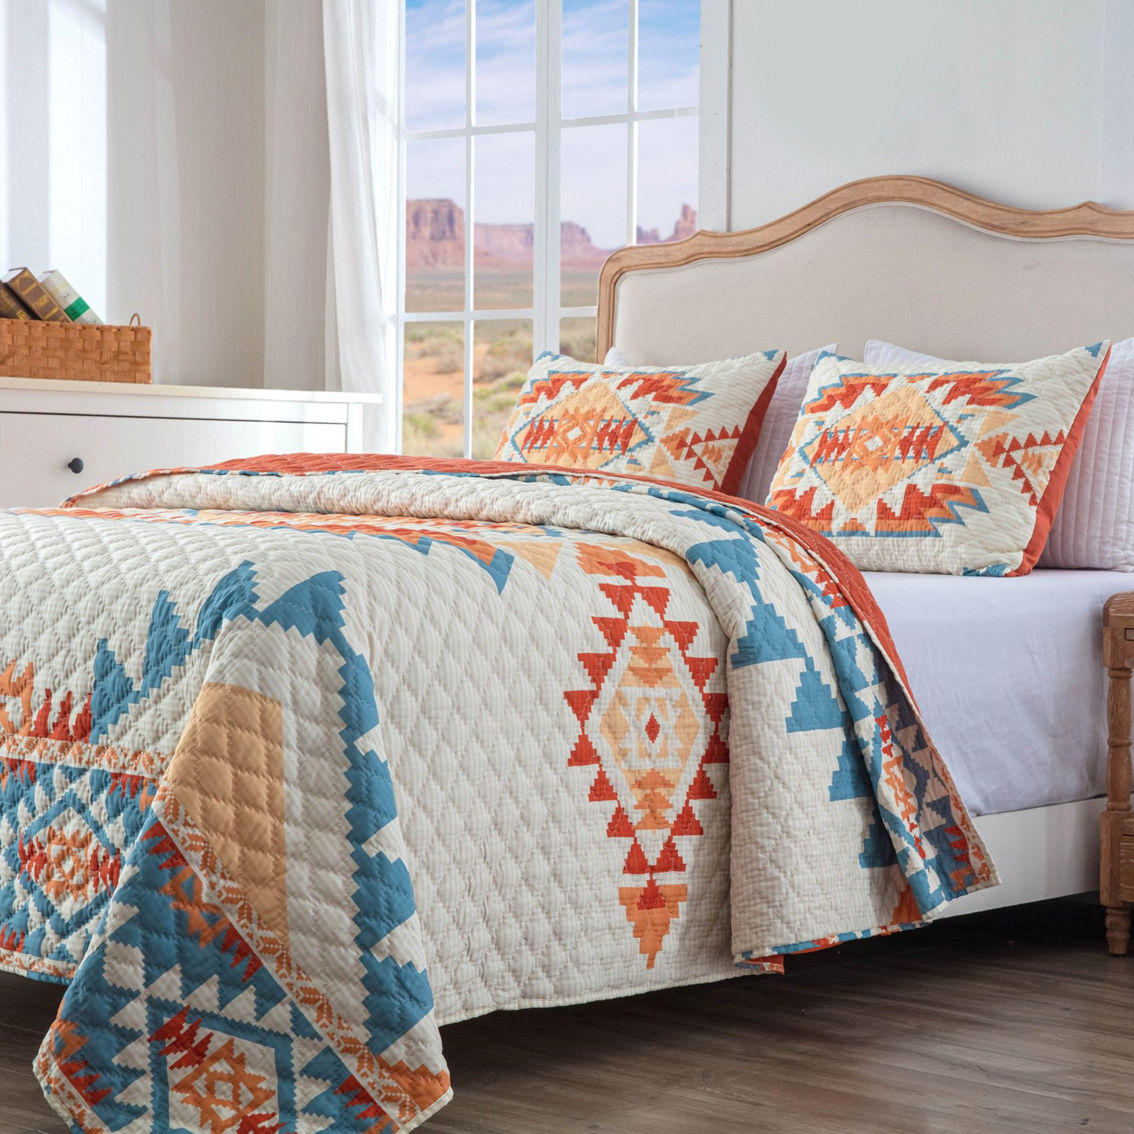 Greenland Home Horizon Cotton Blend Quilt and Pillow Sham Set - Image 3 of 4